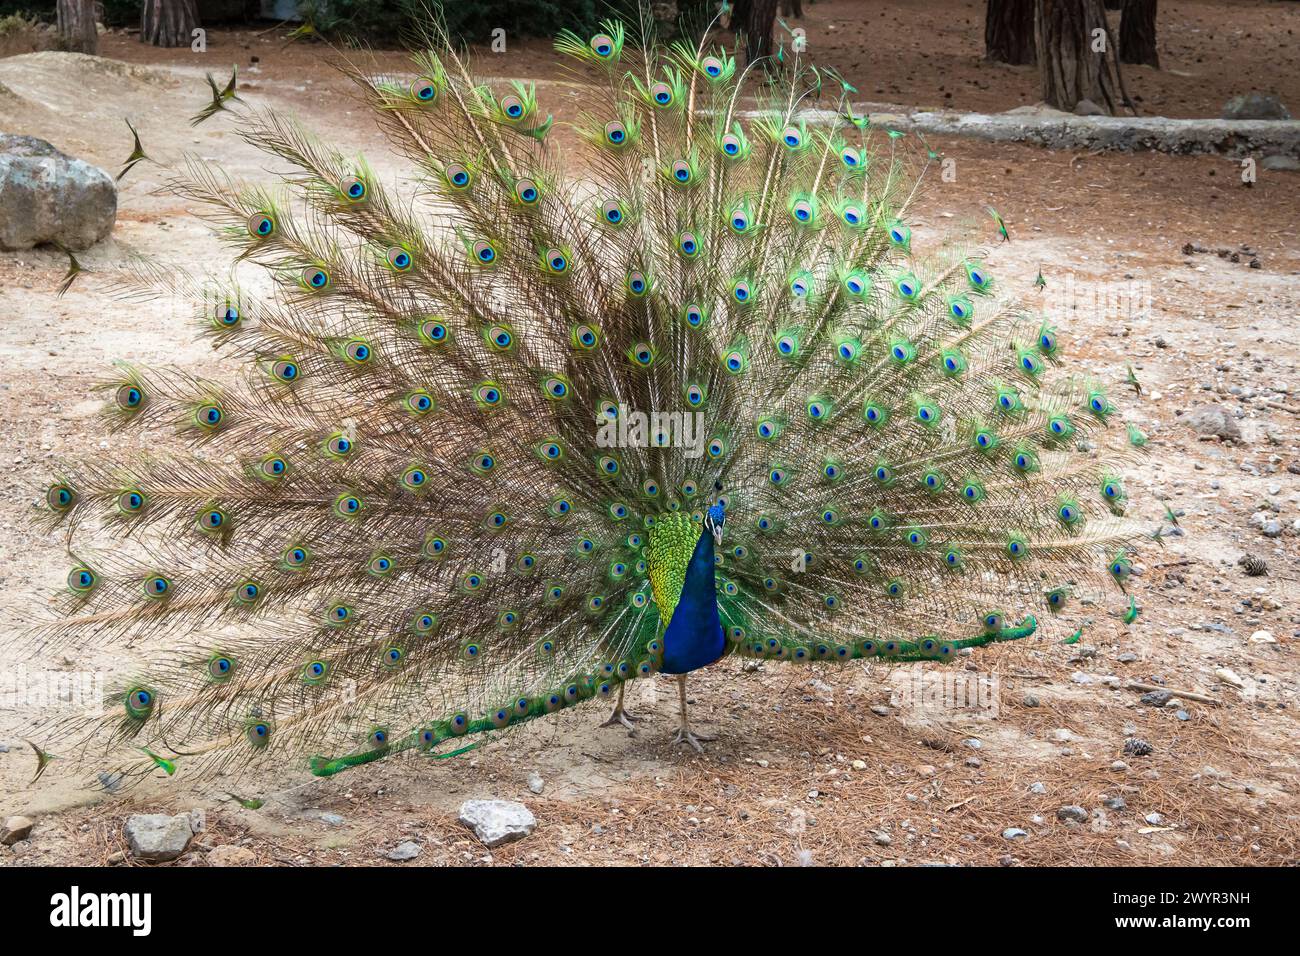 Peacock spreading its beautiful colorful tail. Plaka Forest, located in the Plaka Region of Kos Island. Greece Stock Photo